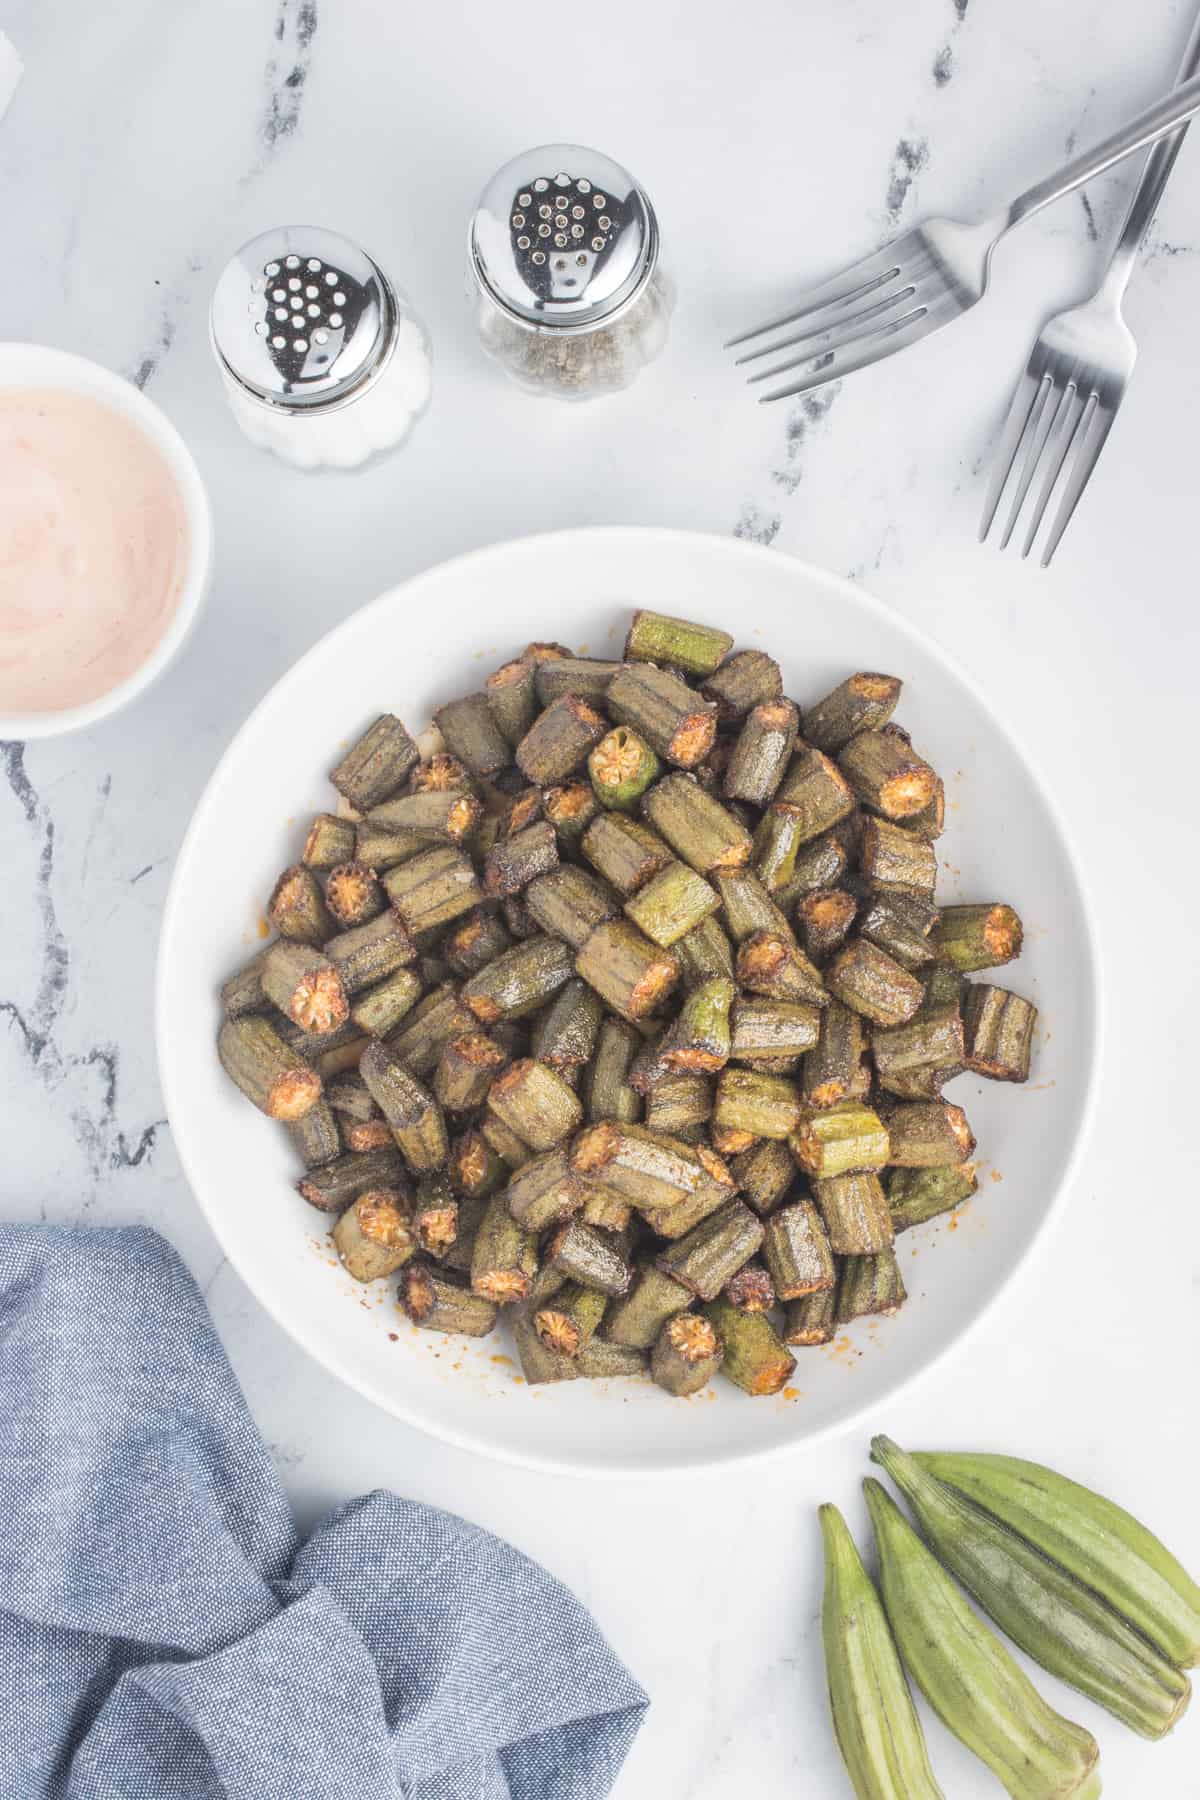 The image depicts cooked okra on a plate. The okra has been cooked to a deliciously crispy and tender texture, making it an inviting dish ready to be savored.